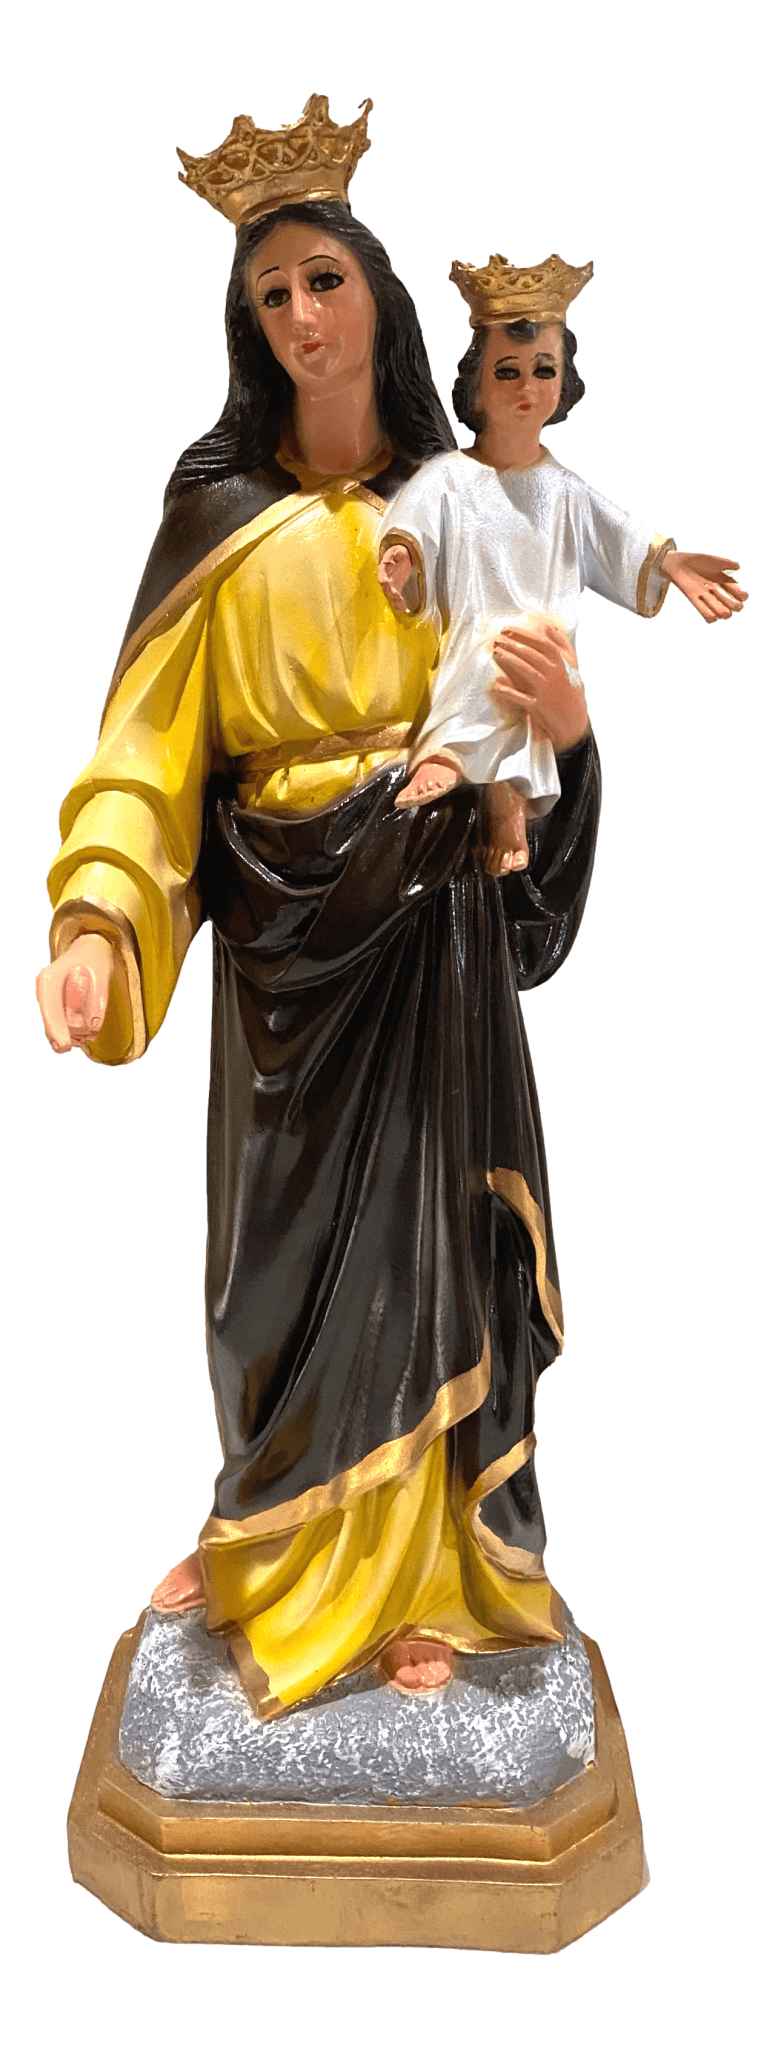 Statue Virgen Of Mt. Carmel Large Handcrafted By Skilled Mexican Artisans 21 L x 7 W inches - Ysleta Mission Gift Shop- VOTED El Paso's Best Gift Shop